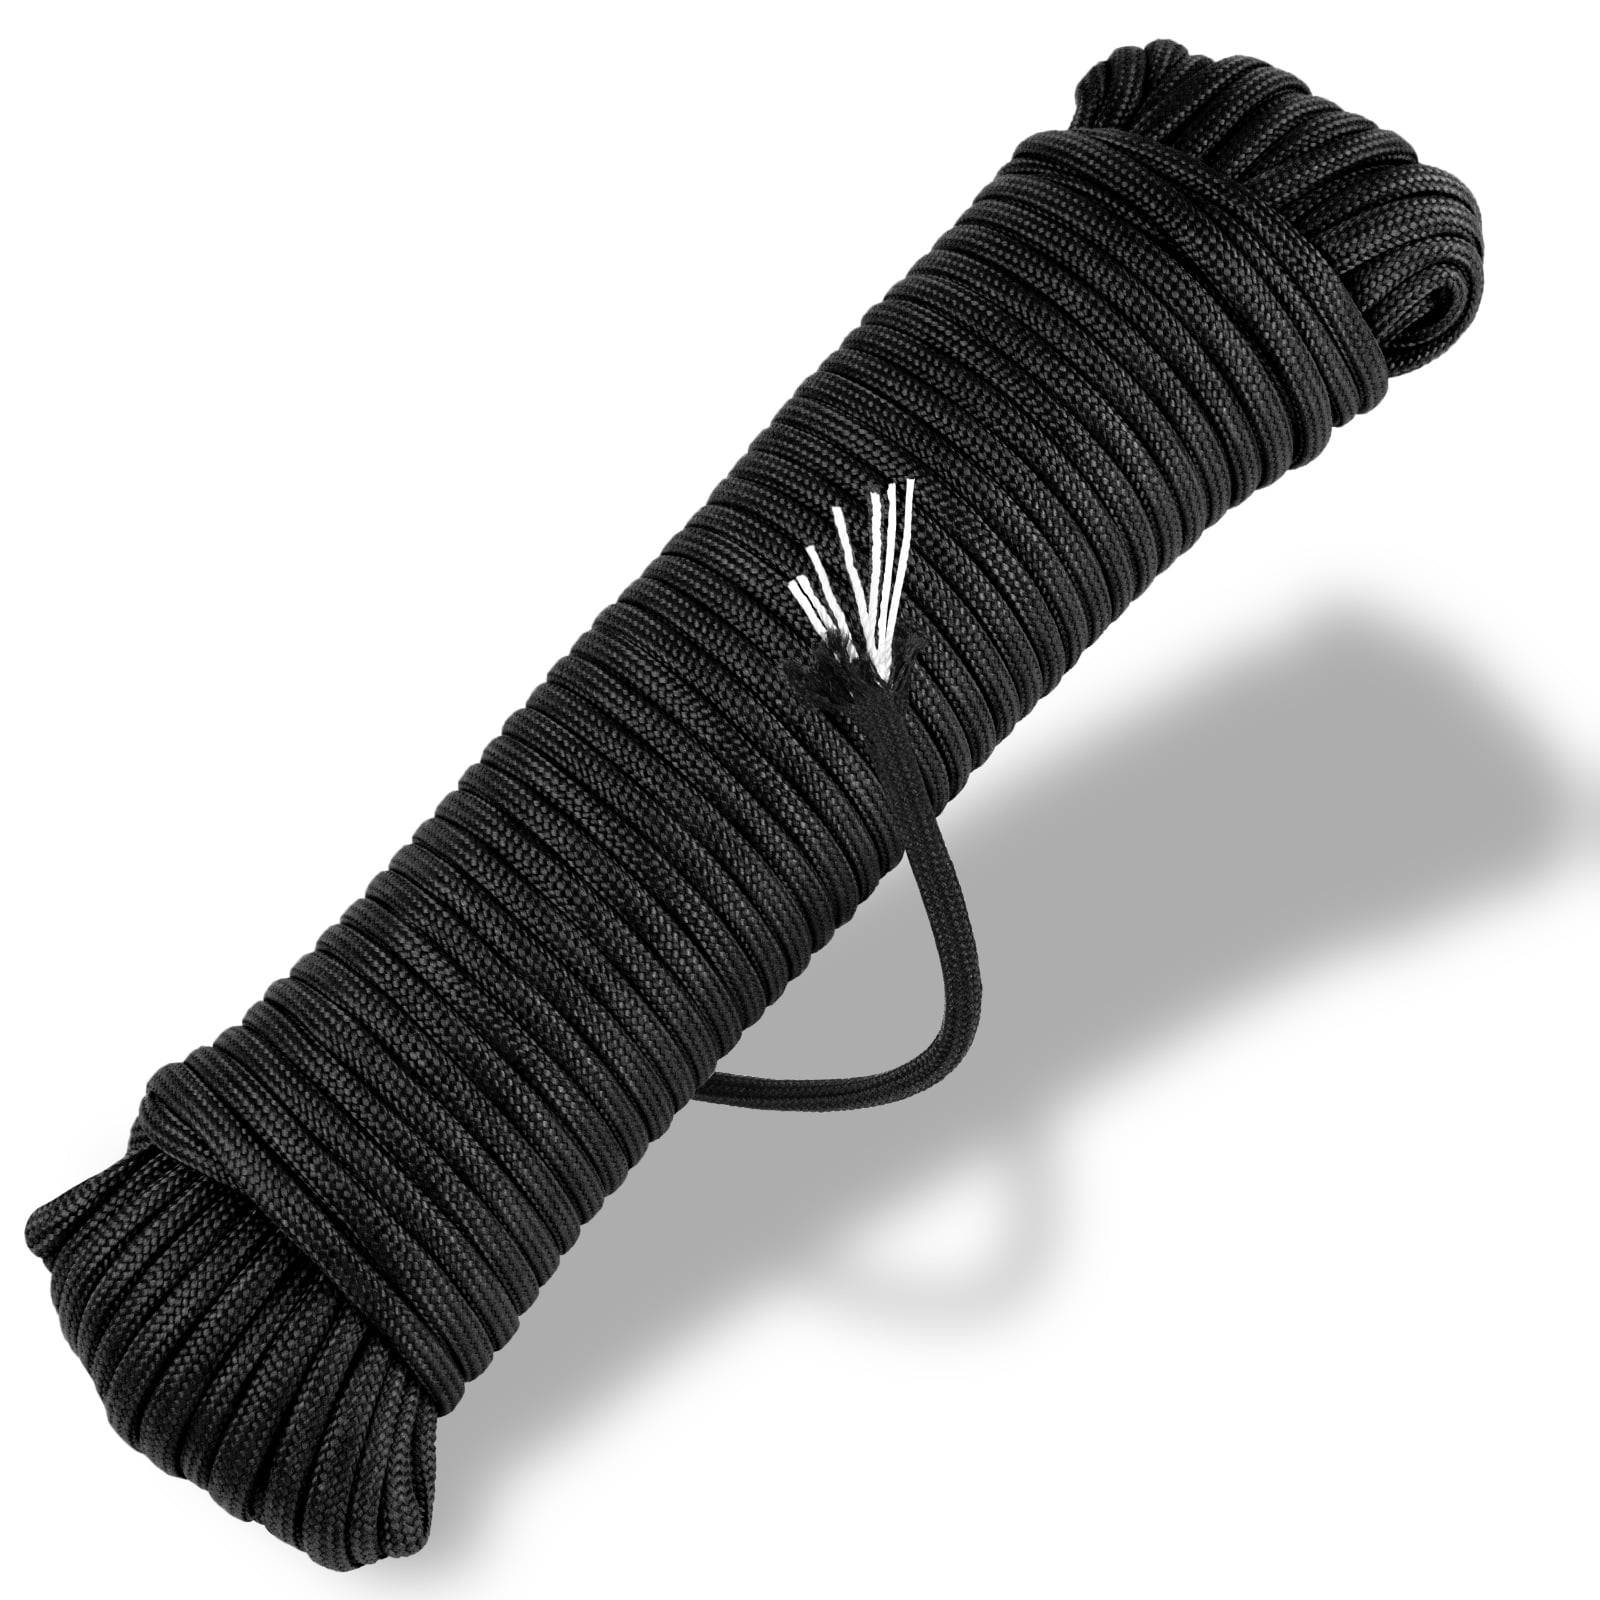 PARACORD PLANET Typ III 7 Str/änge 550 Paracord